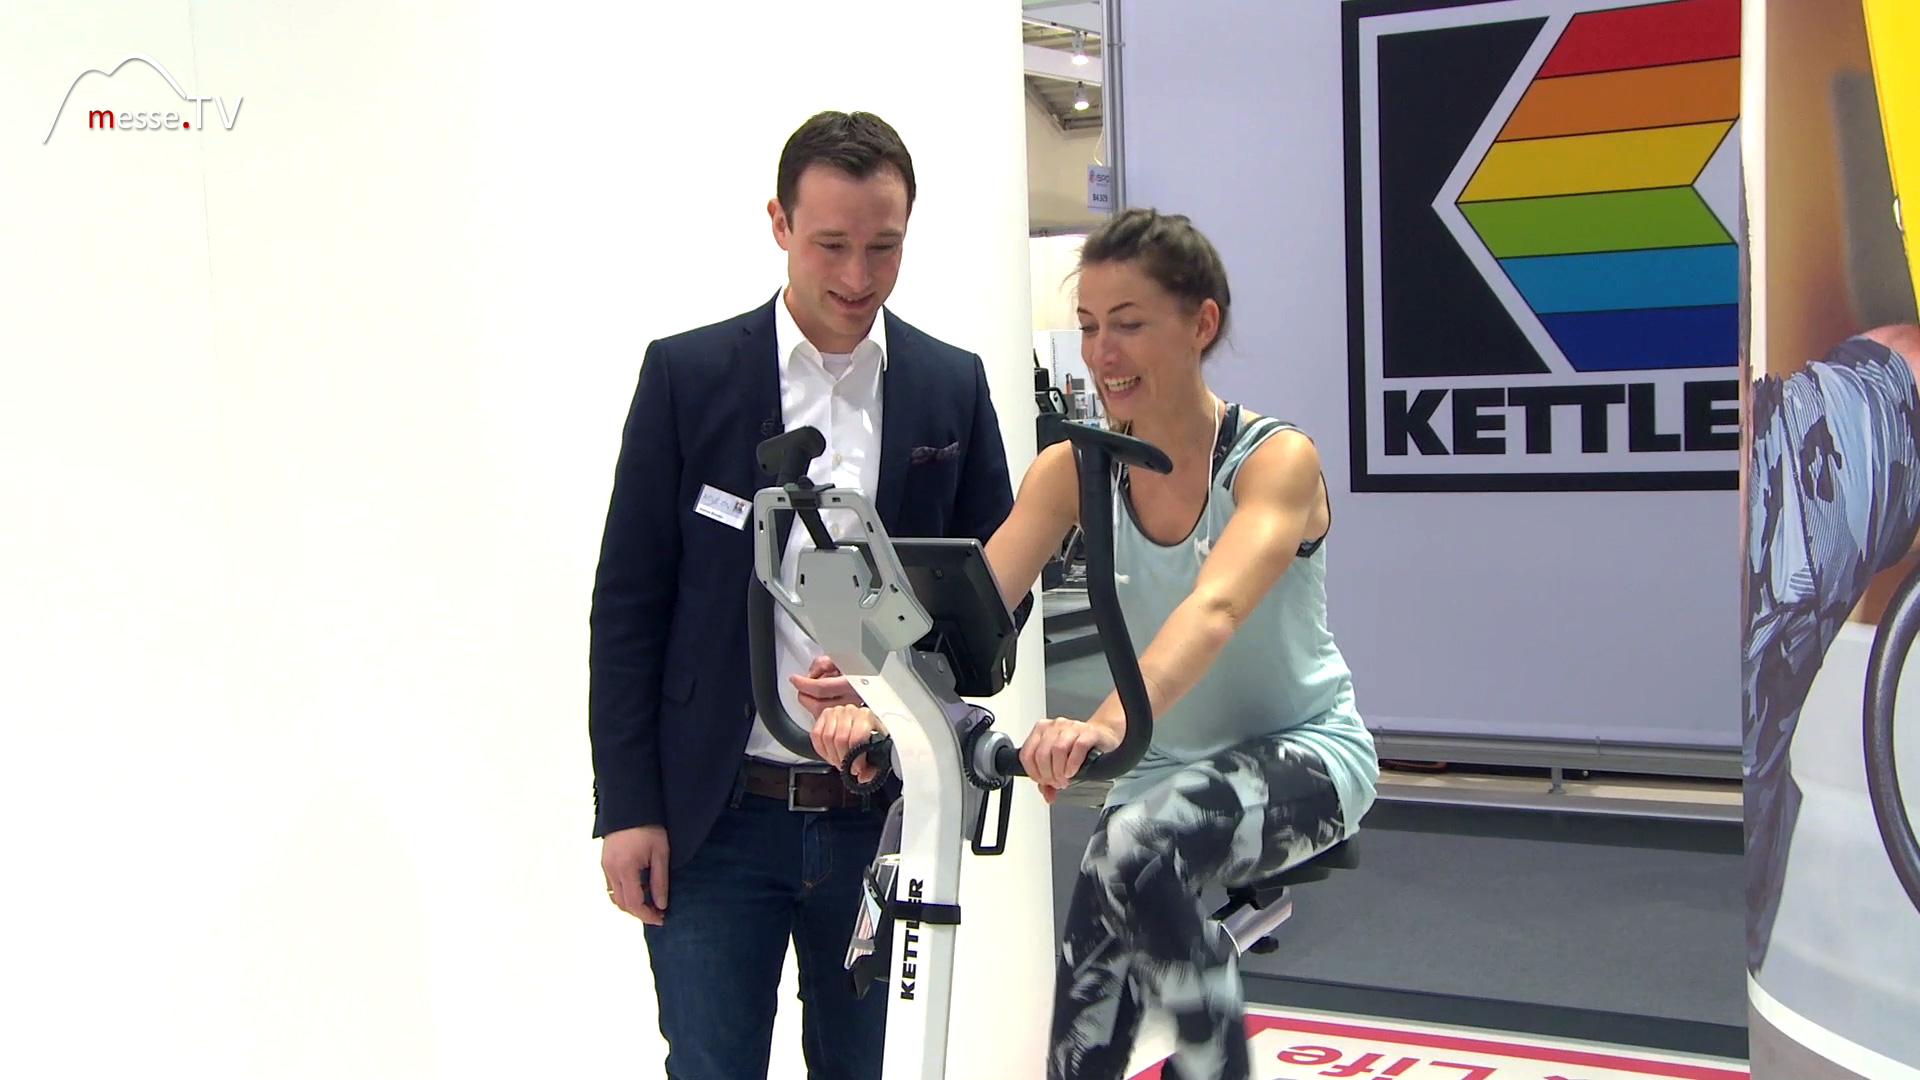 Kettler cycling training at home Ispo 2017